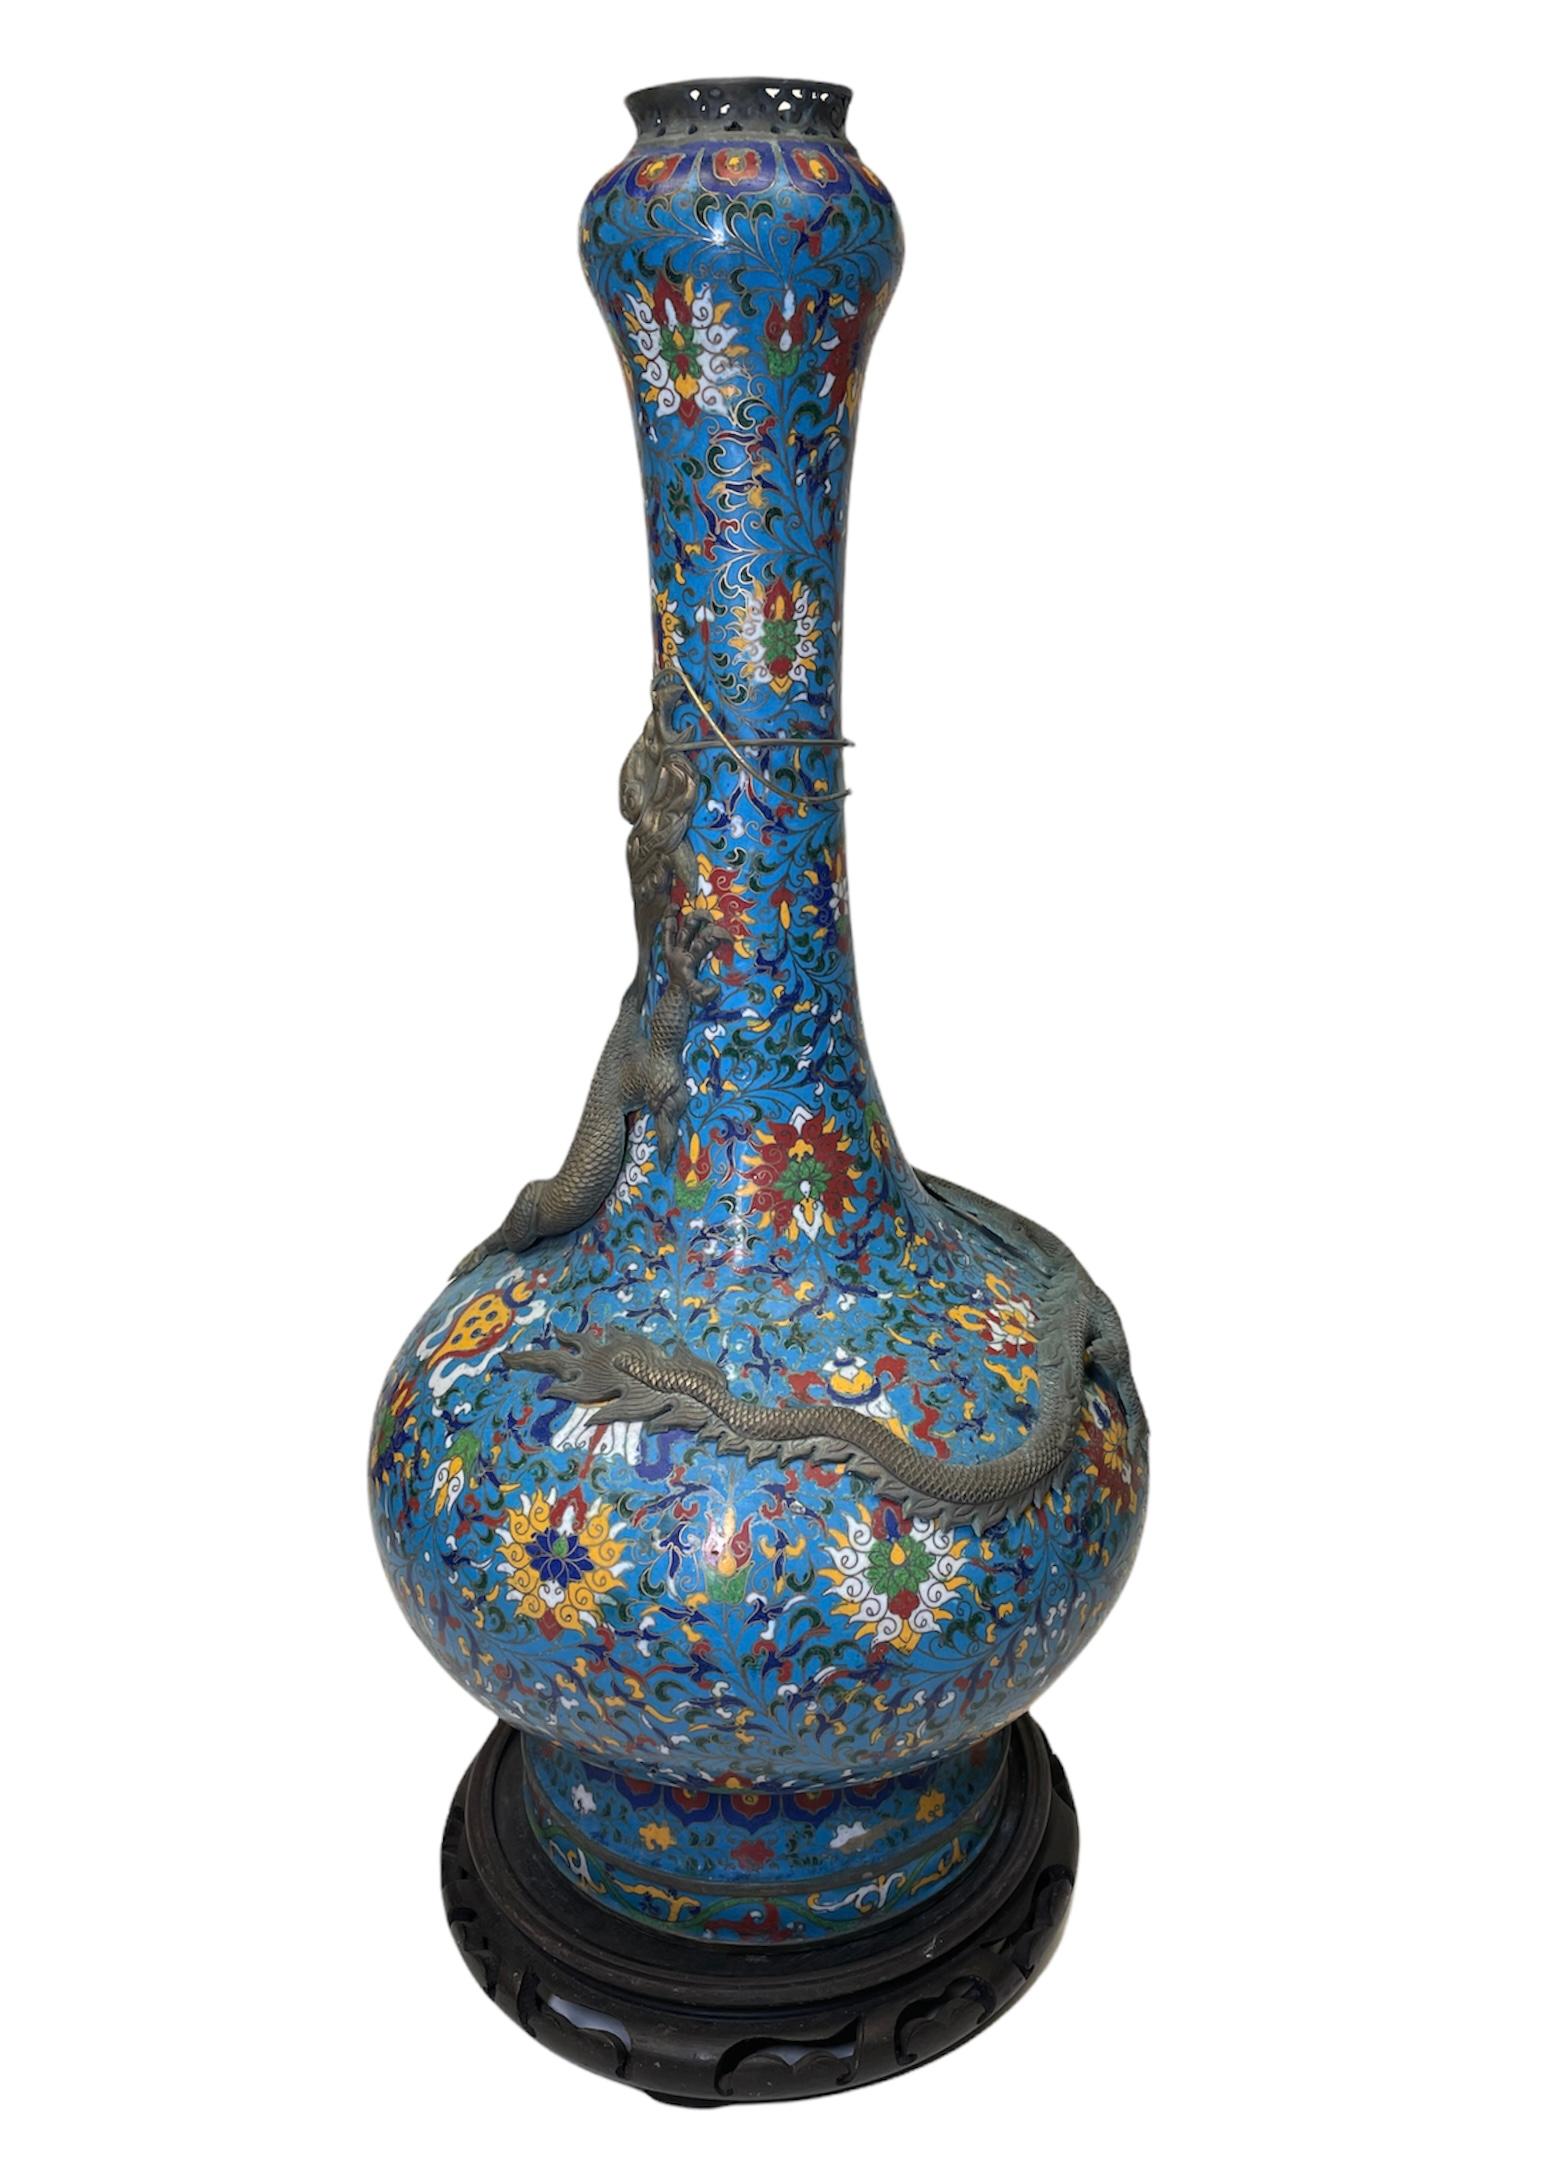 Chinese Export Rare Chinese Large and Long Cloisonné Urn Vase